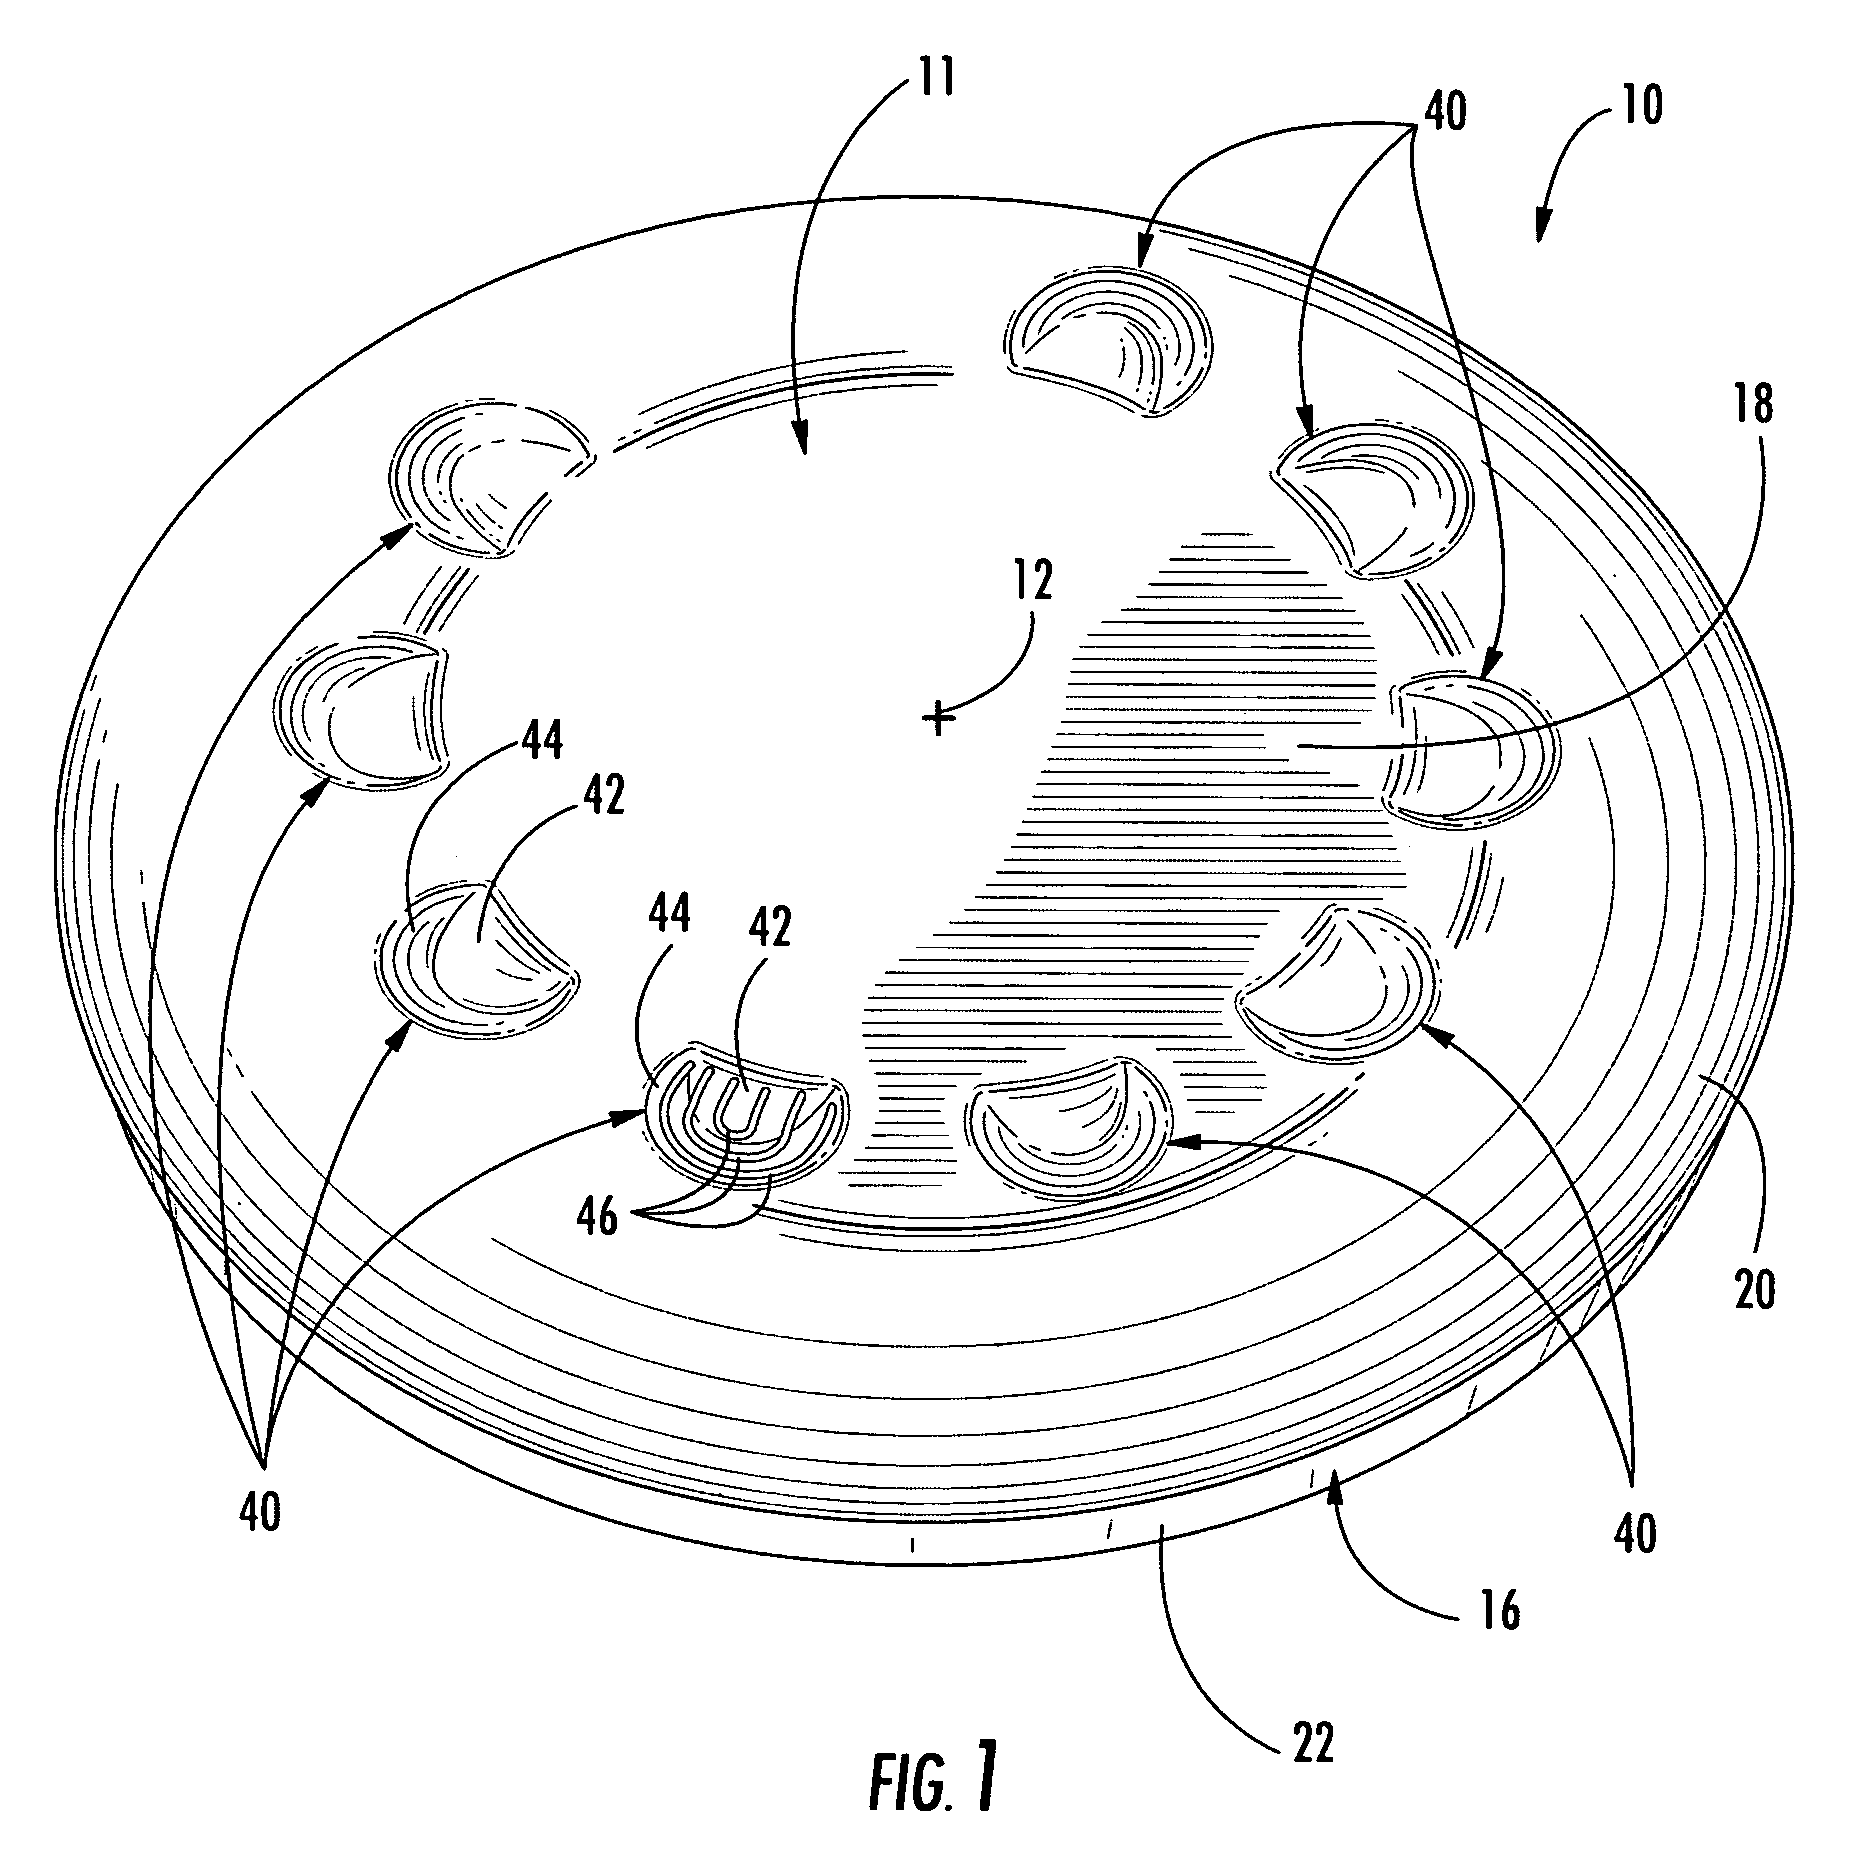 Flying disc having contoured features